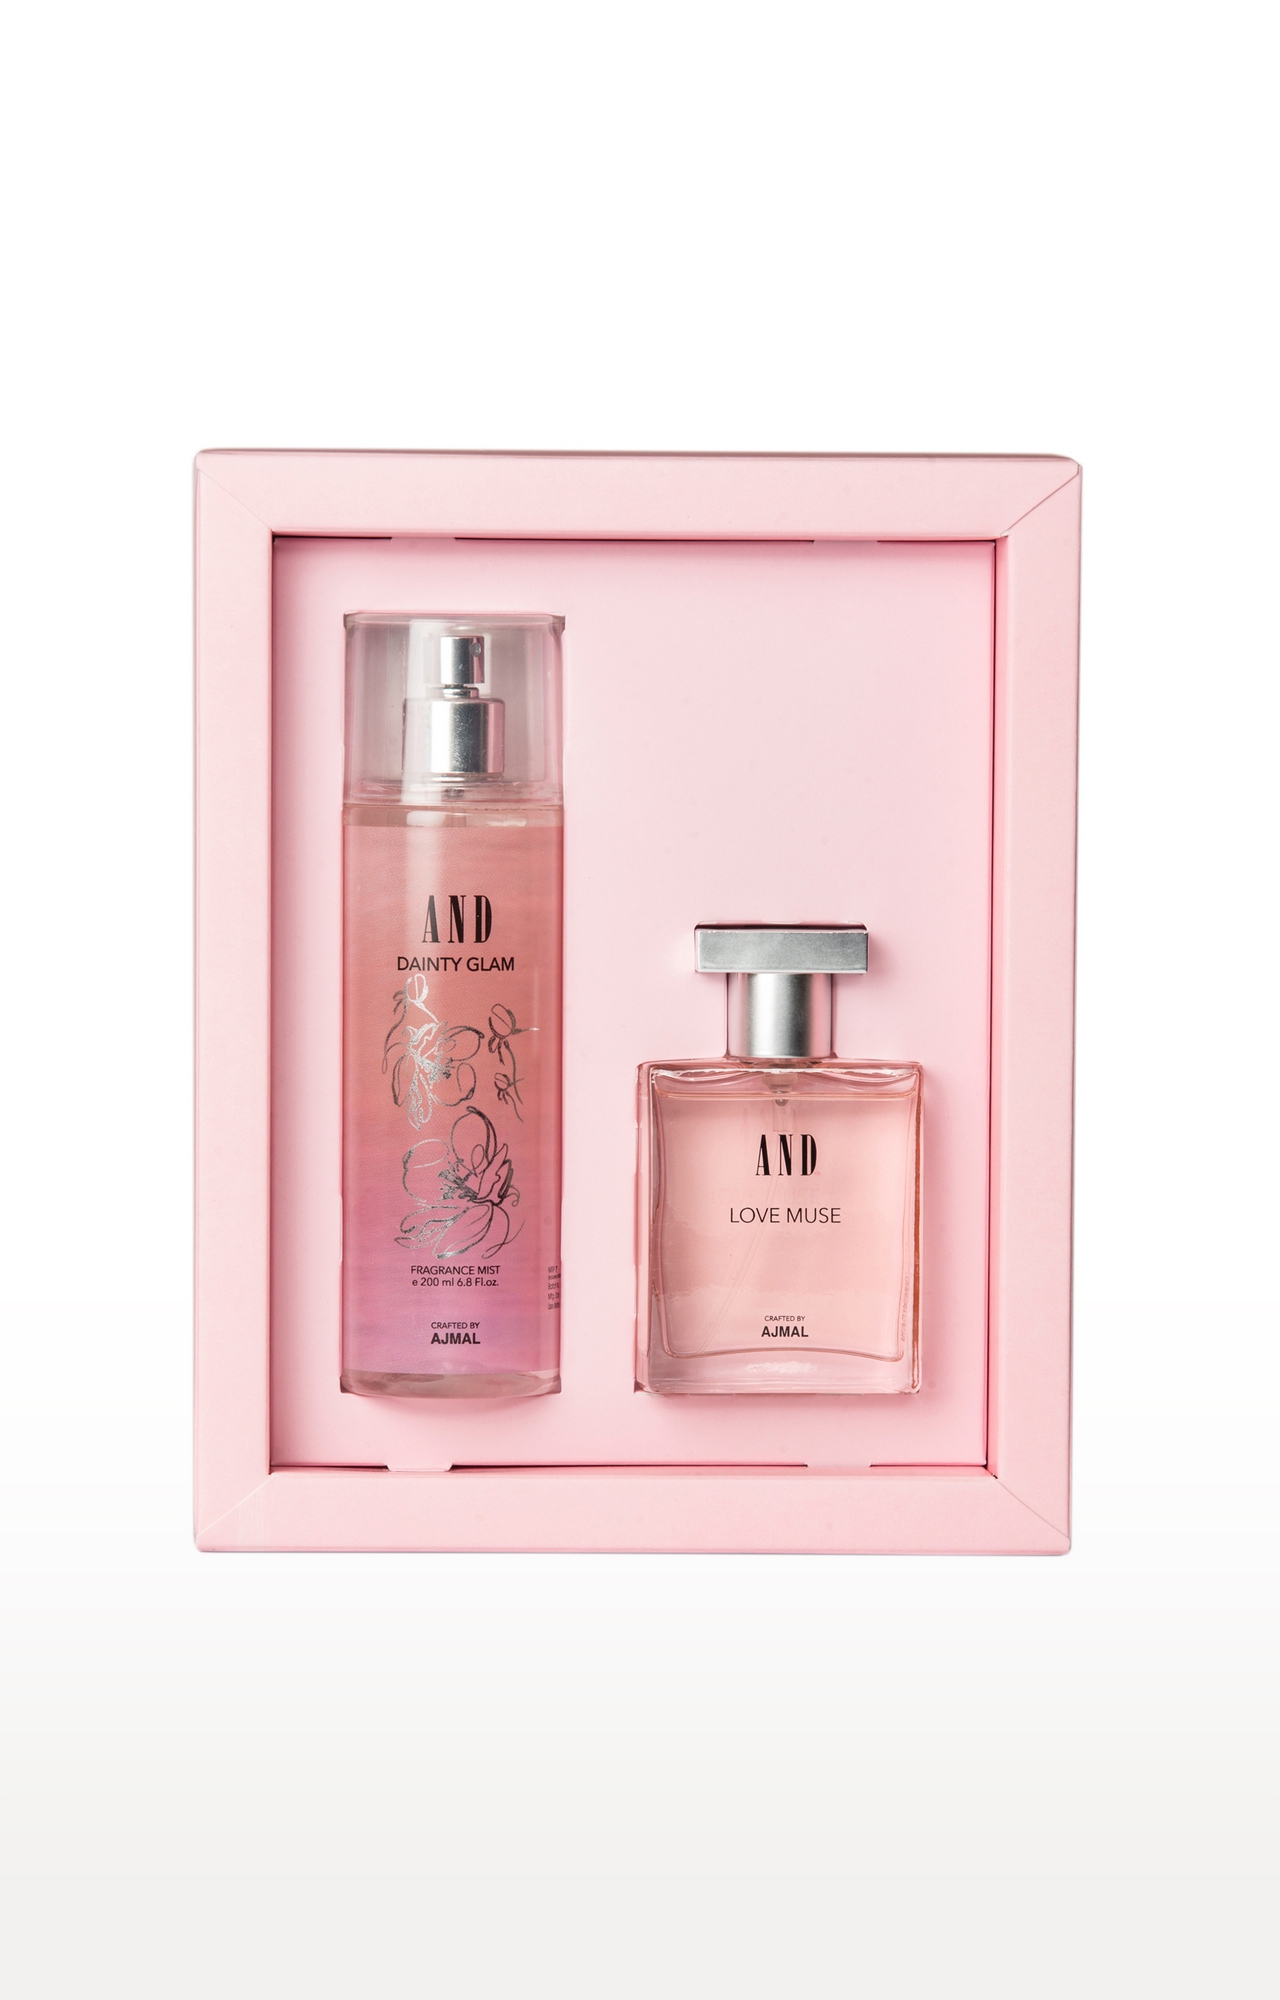 AND Crafted By Ajmal | AND Love Muse Eau De Parfum 50ML & Dainty Glam Body Mist 200ML for Women Crafted by Ajmal